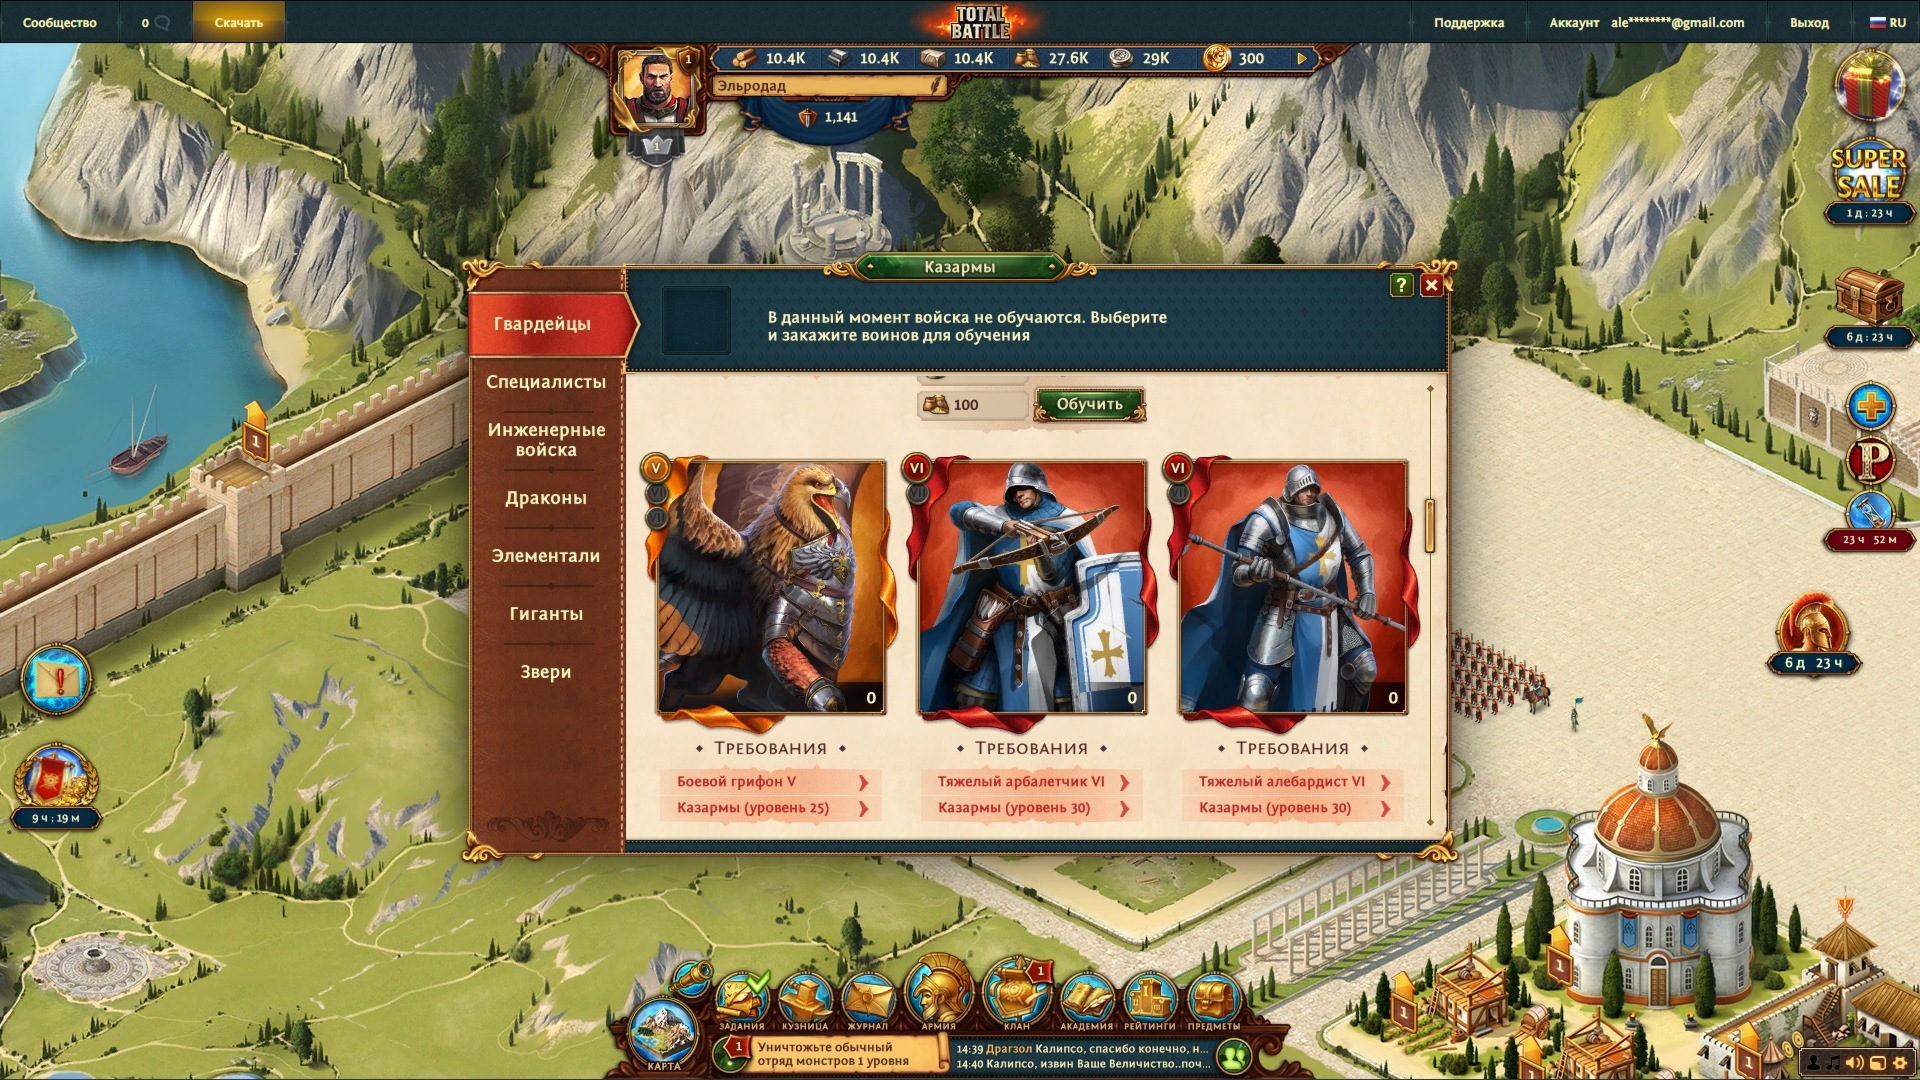 The online game Total Battle on Zarium will turn you into a new emperor